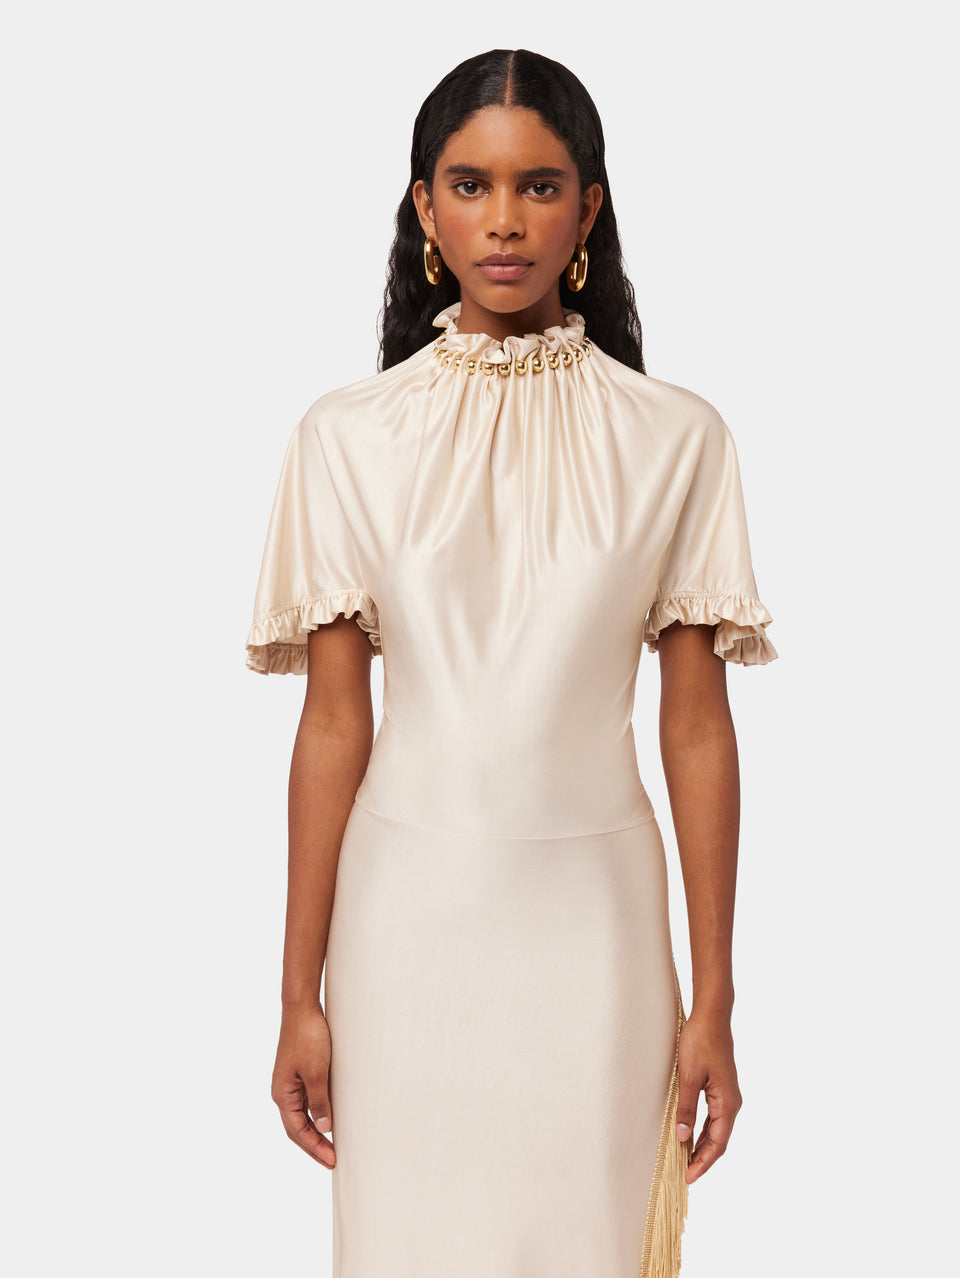 JERSEY CREAM ASYMMETRIC FRINGED DRESS WITH BEADS